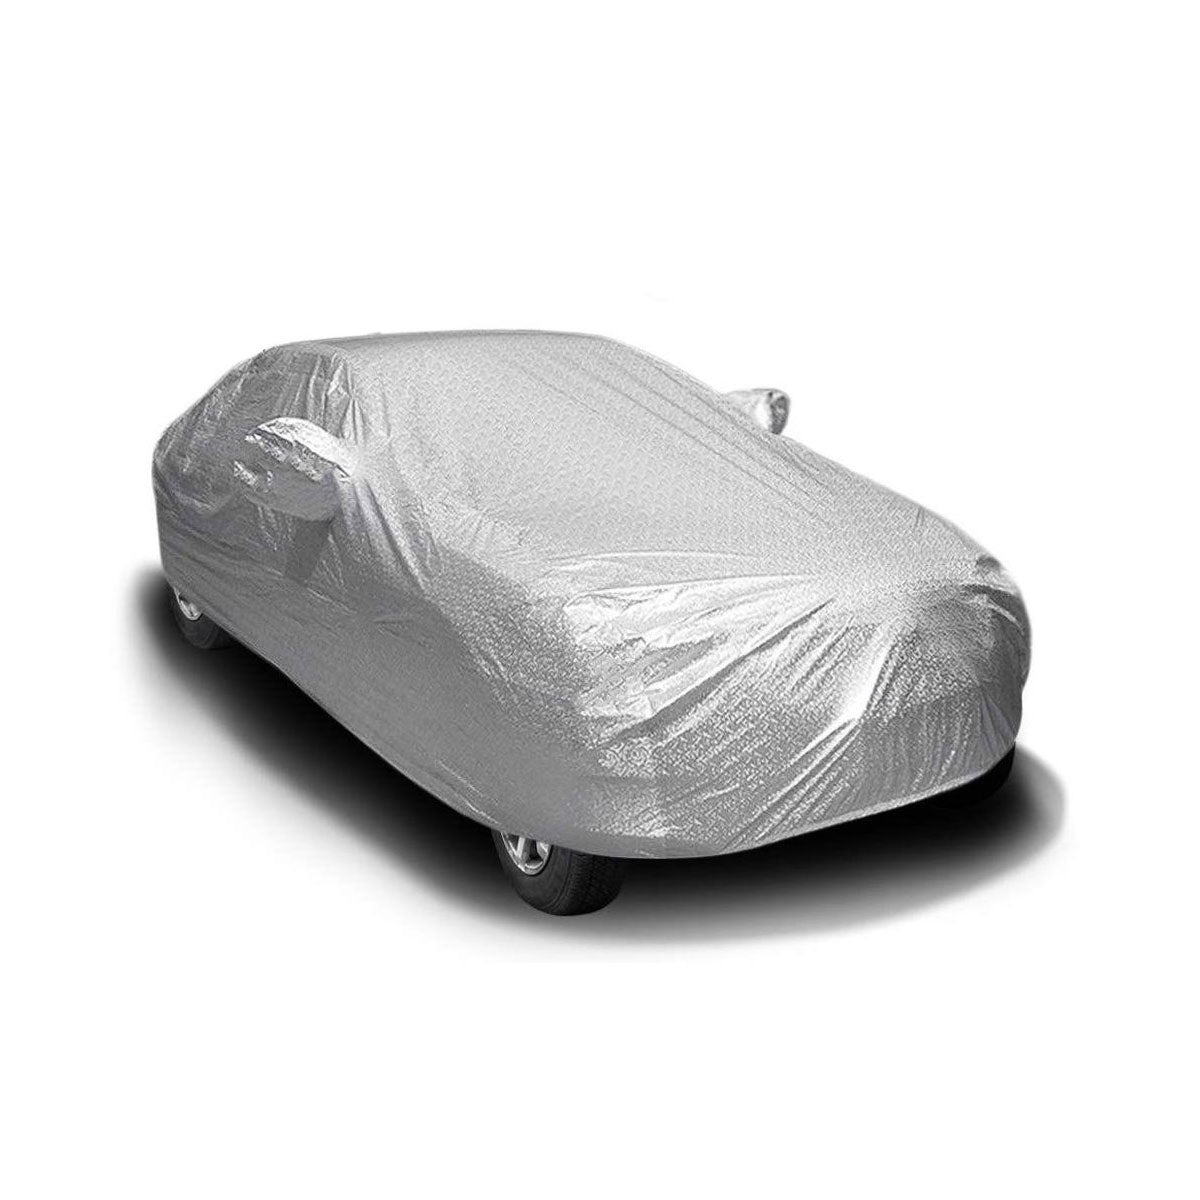 Oshotto Spyro Silver Anti Reflective, dustproof and Water Proof Car Body Cover with Mirror Pockets For Hyundai Getz